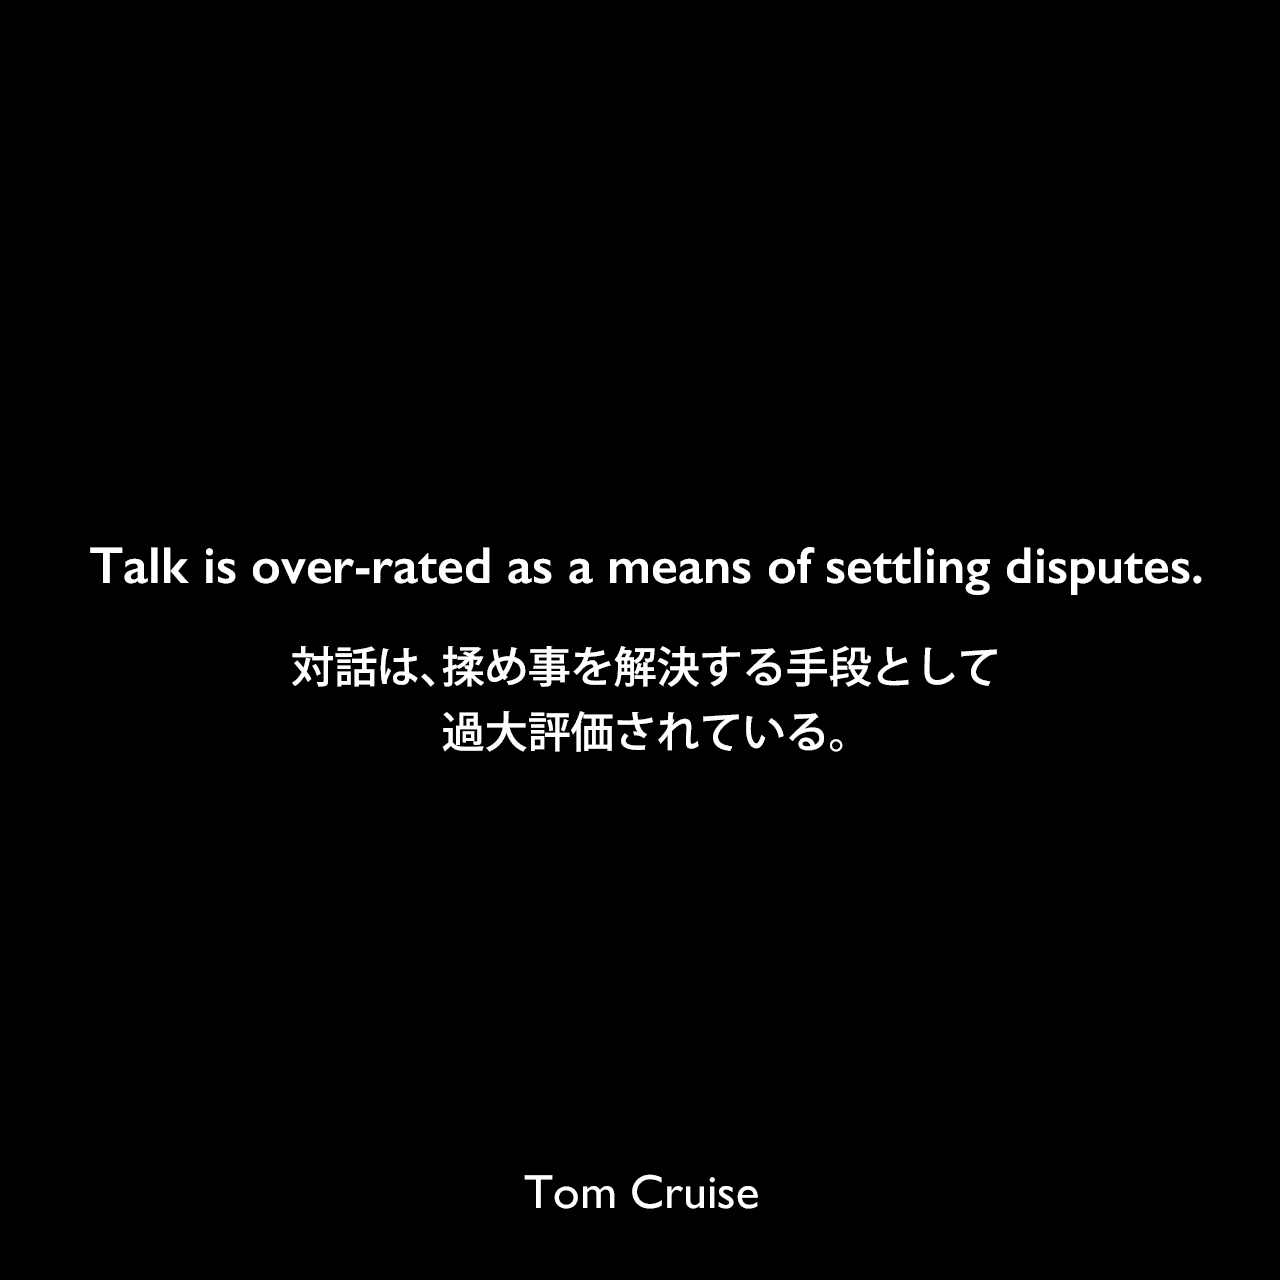 Talk is over-rated as a means of settling disputes.対話は、揉め事を解決する手段として過大評価されている。Tom Cruise